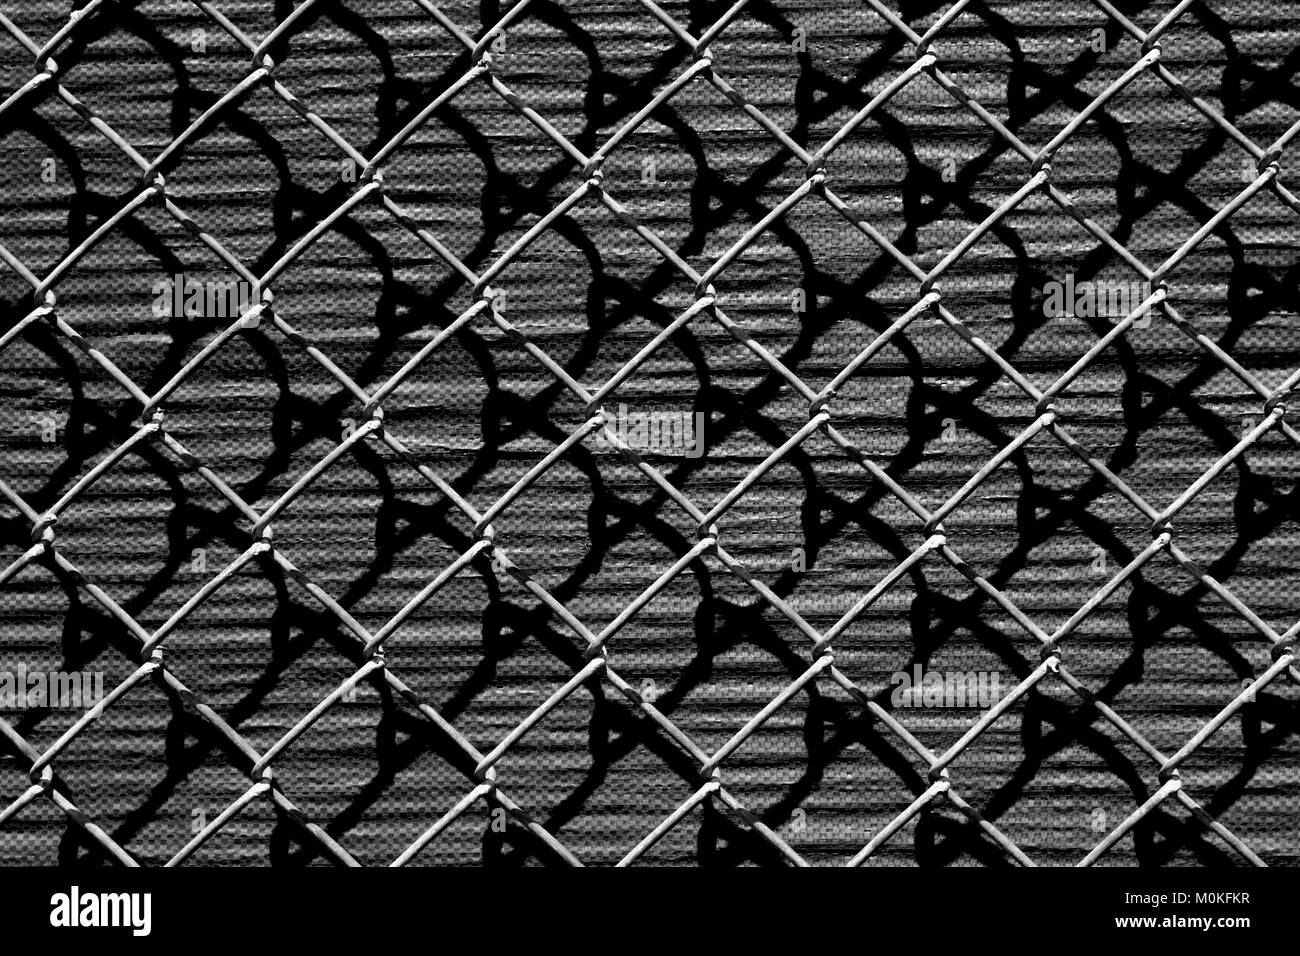 Shadows and Chain Link Fence Stock Photo